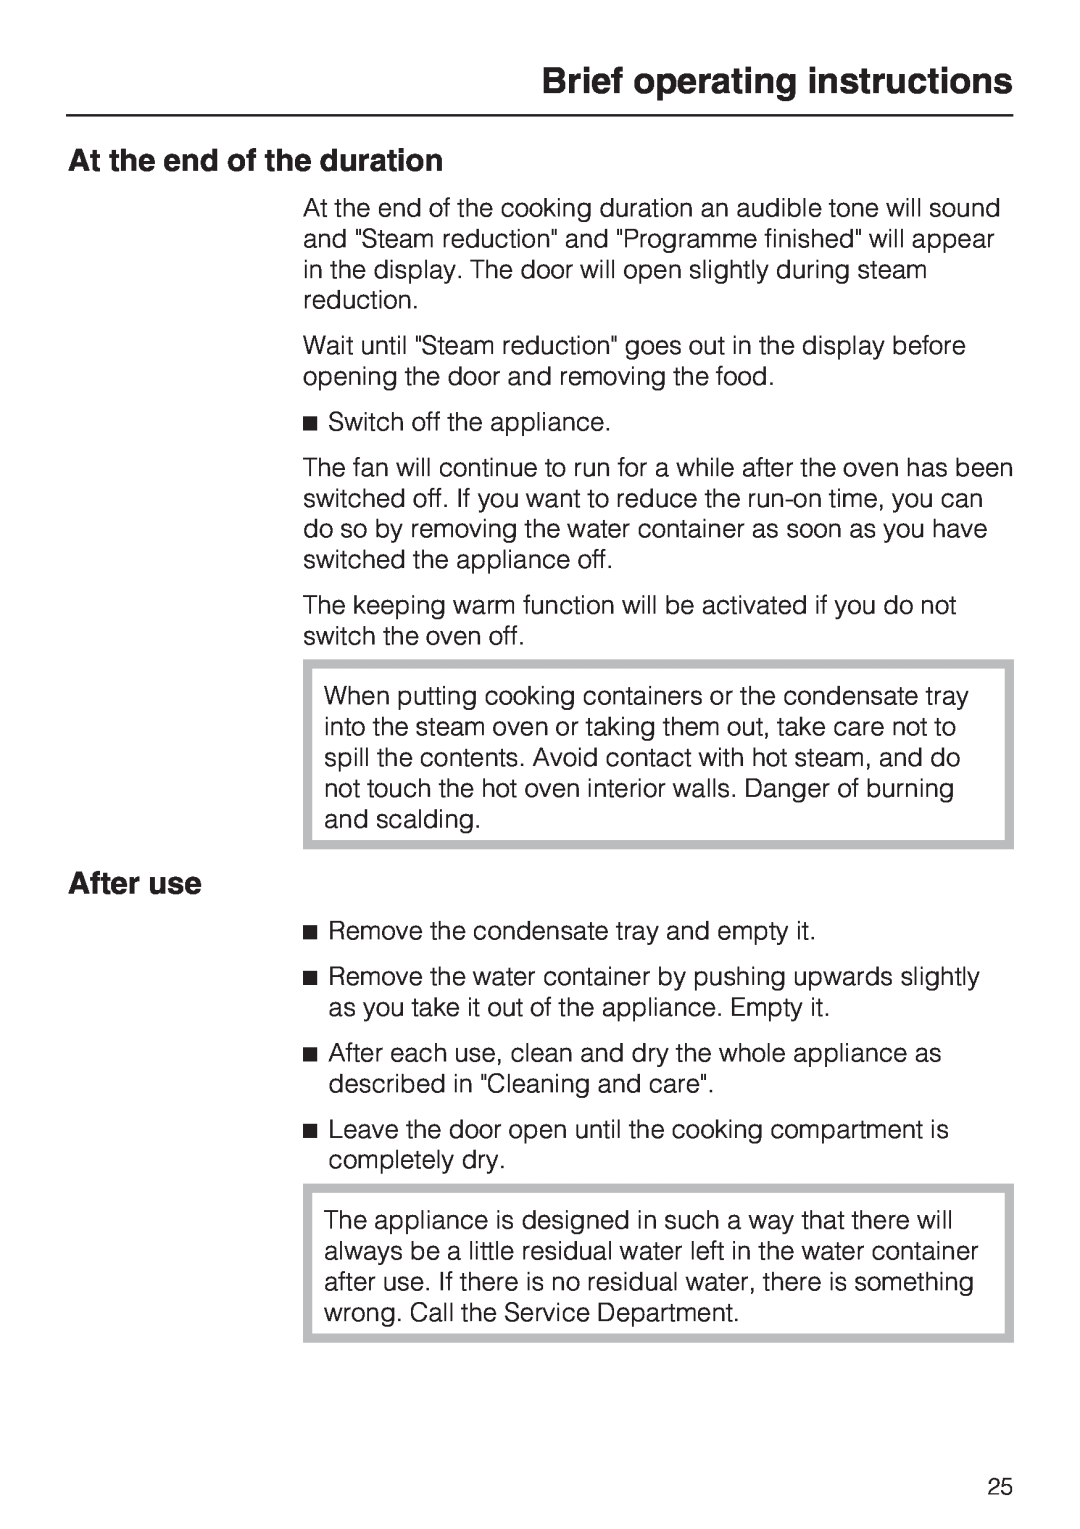 Miele DG 5088, DG 5070, DG 5080 installation instructions At the end of the duration, After use, Brief operating instructions 